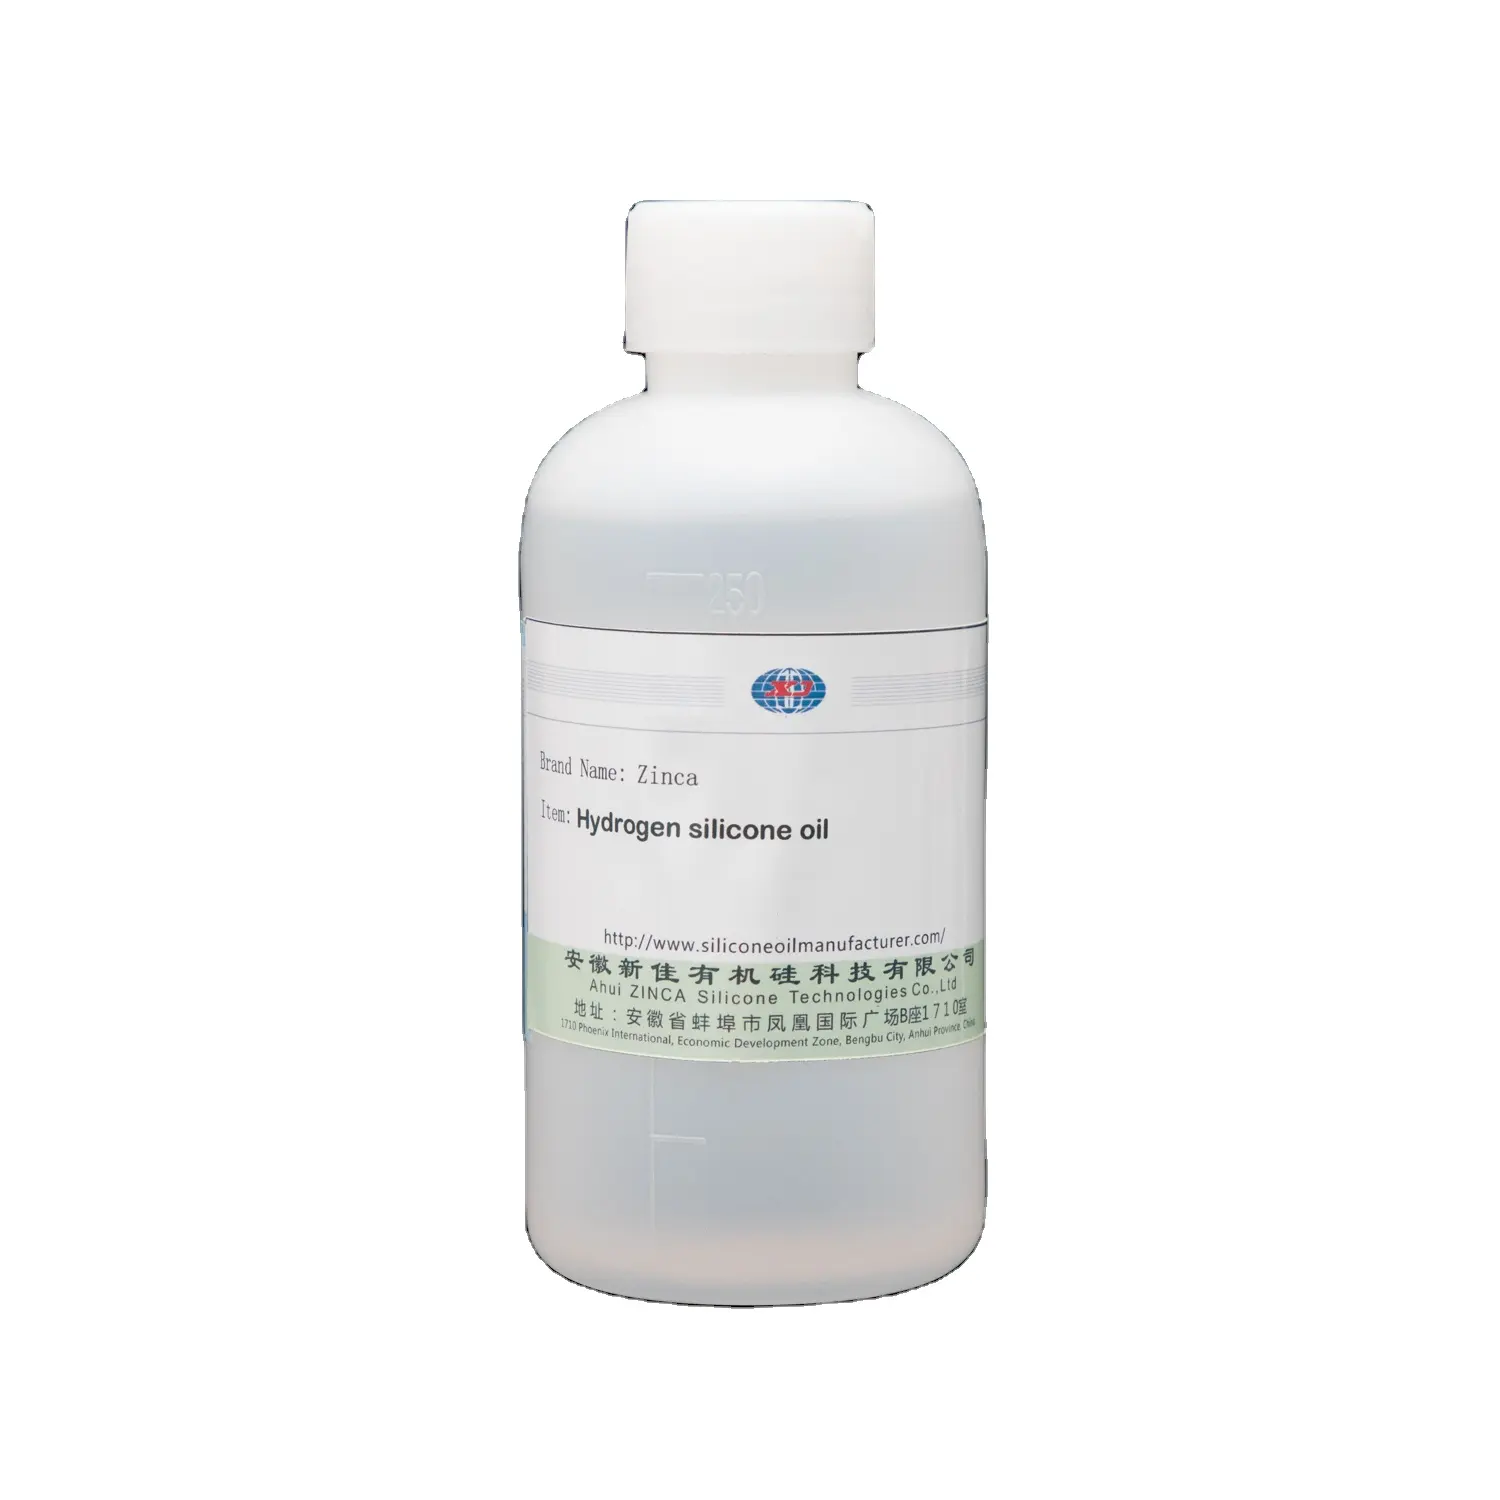 Waterproof agent for rubber, fabric, glass and other materials/Methyl High Hydrogen Silicone Oil